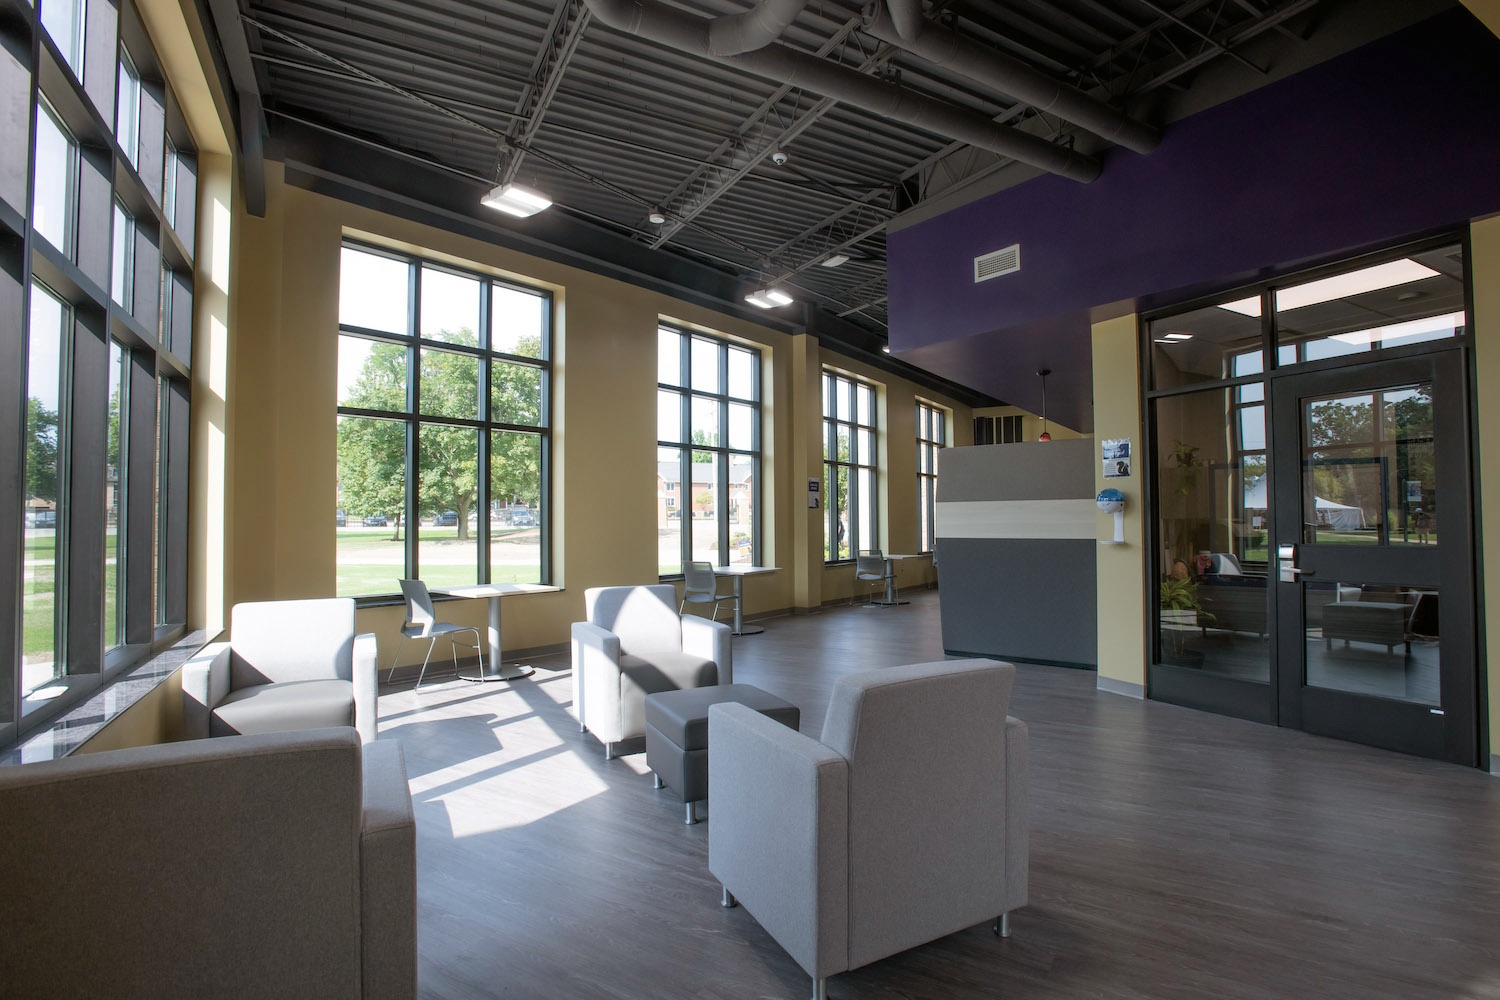 Interior of Serra fitness center expansion featuring comfortable seating and glass doors